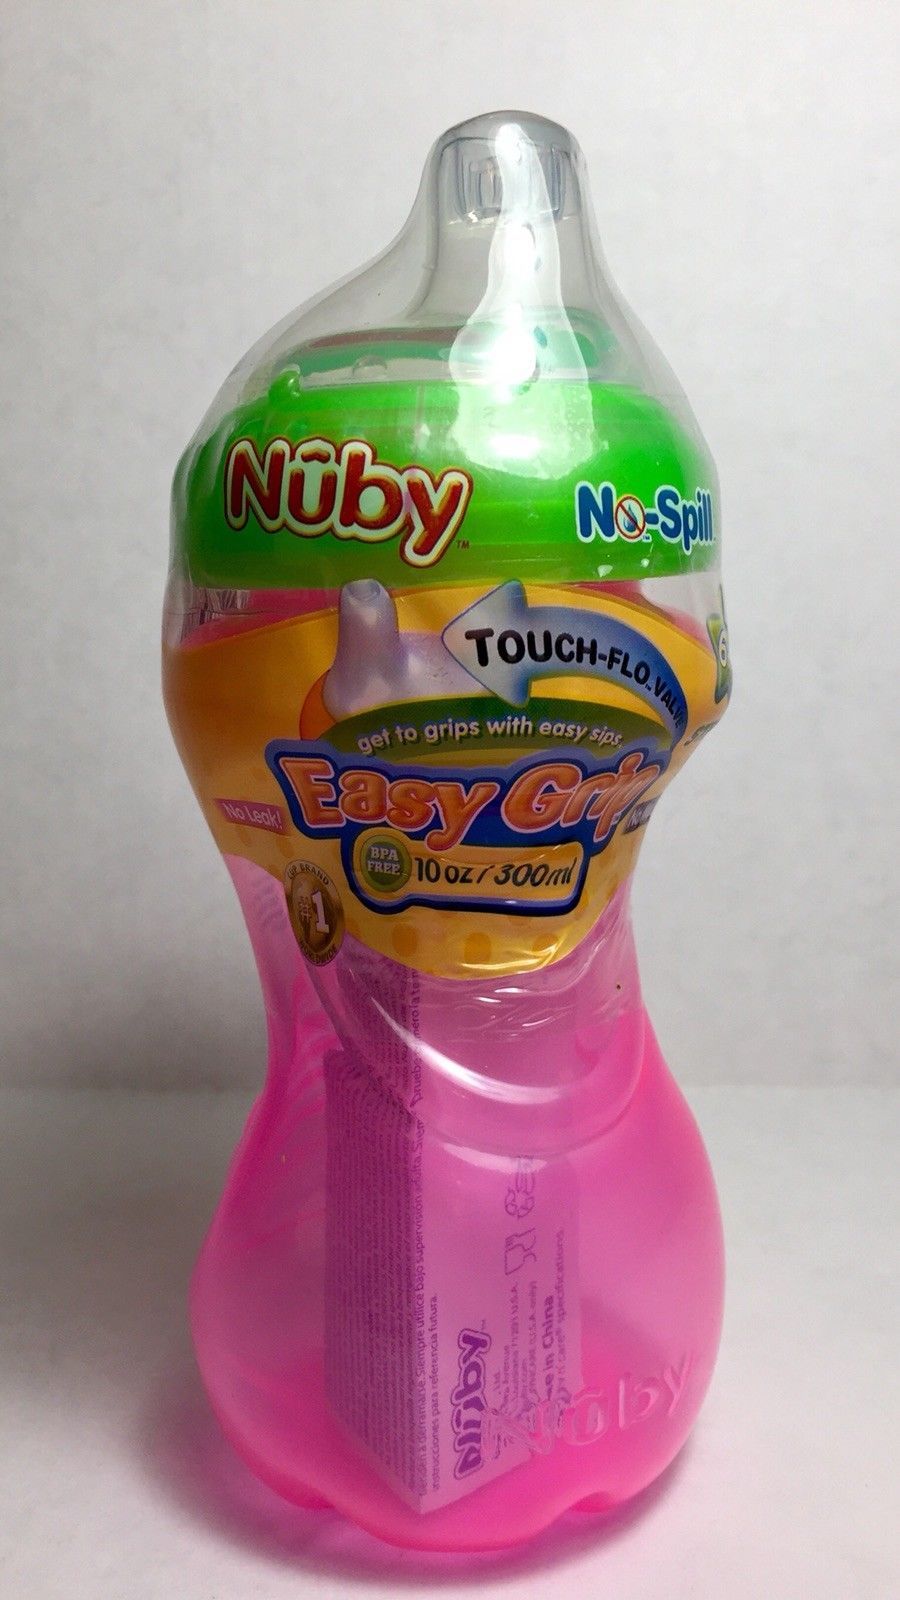 Nuby No Spill Easy Grip Cup Step 2 Pink 10 ounces Touch Flo Valve New Sealed - $9.85